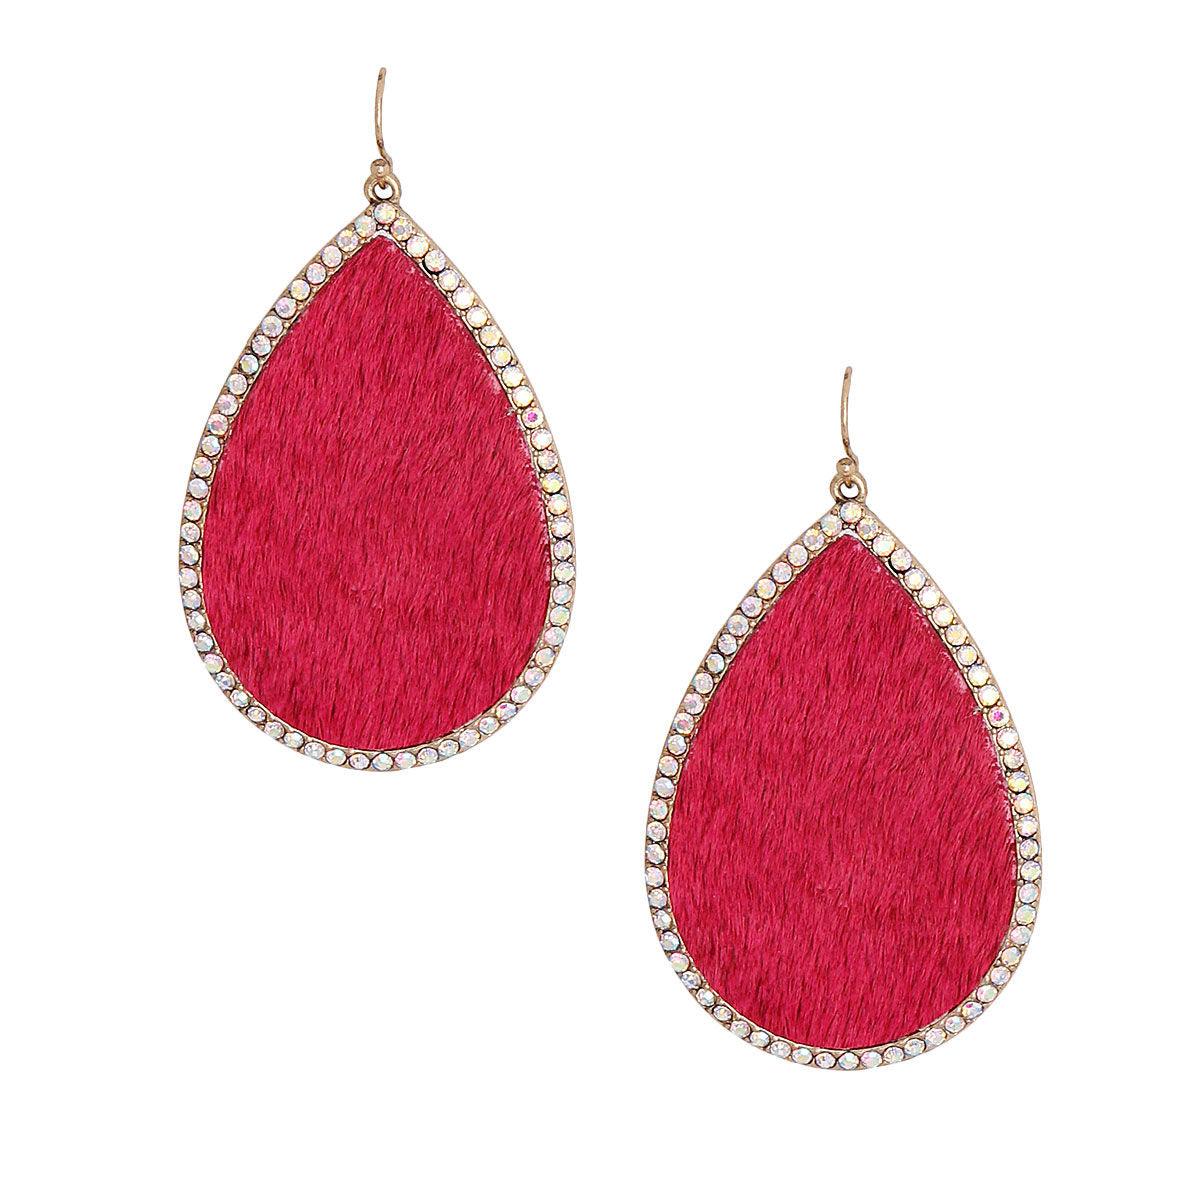 Pink Teardrop Earrings: Every Occasion's Perfect Accessory